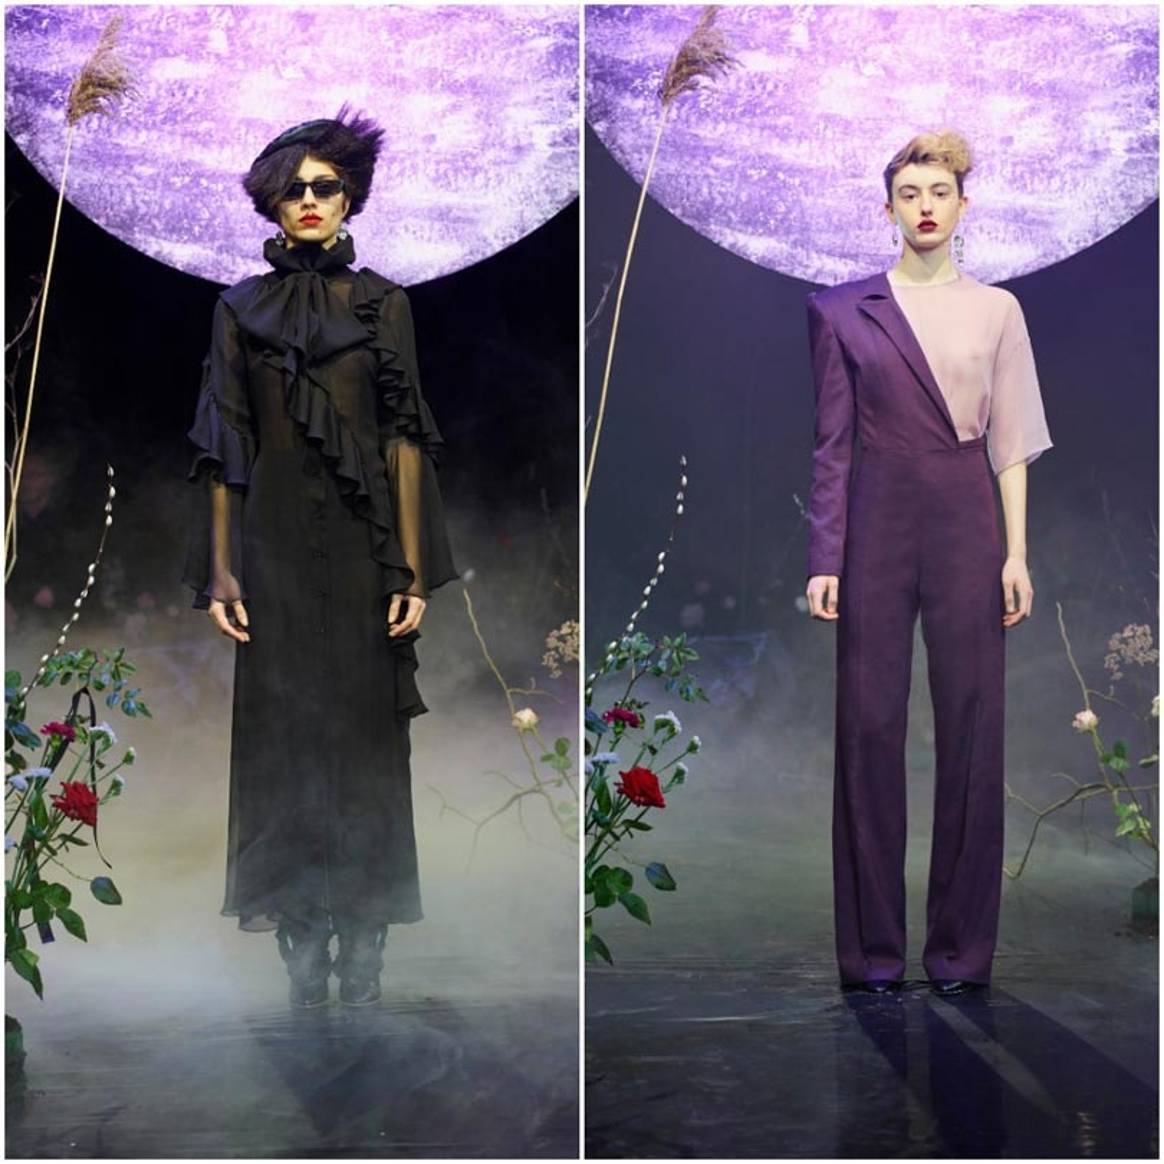 Alistair James cements its aesthetic with 'Sisters of The Moon' at LFW AW18